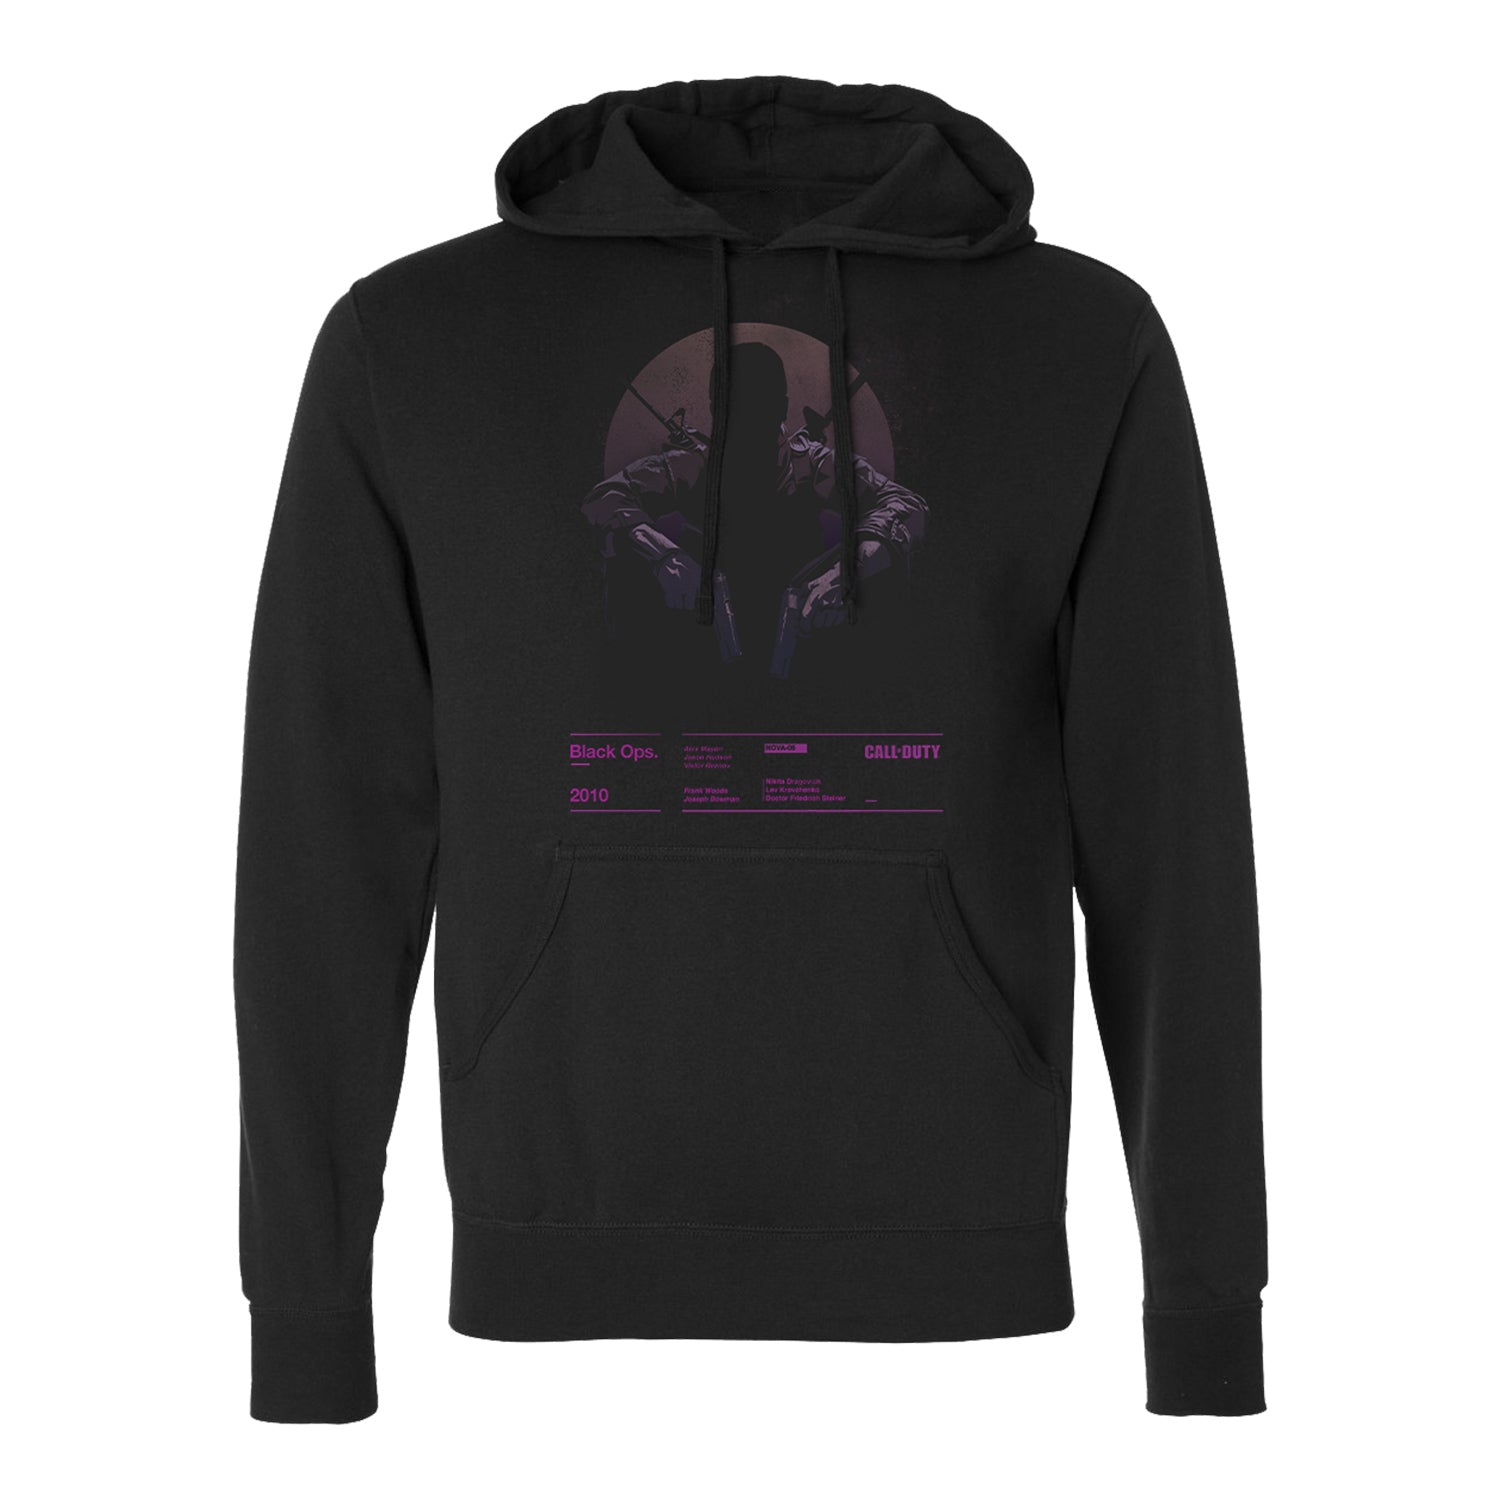 Call of Duty Black Black Ops (2010) Hoodie - Front View